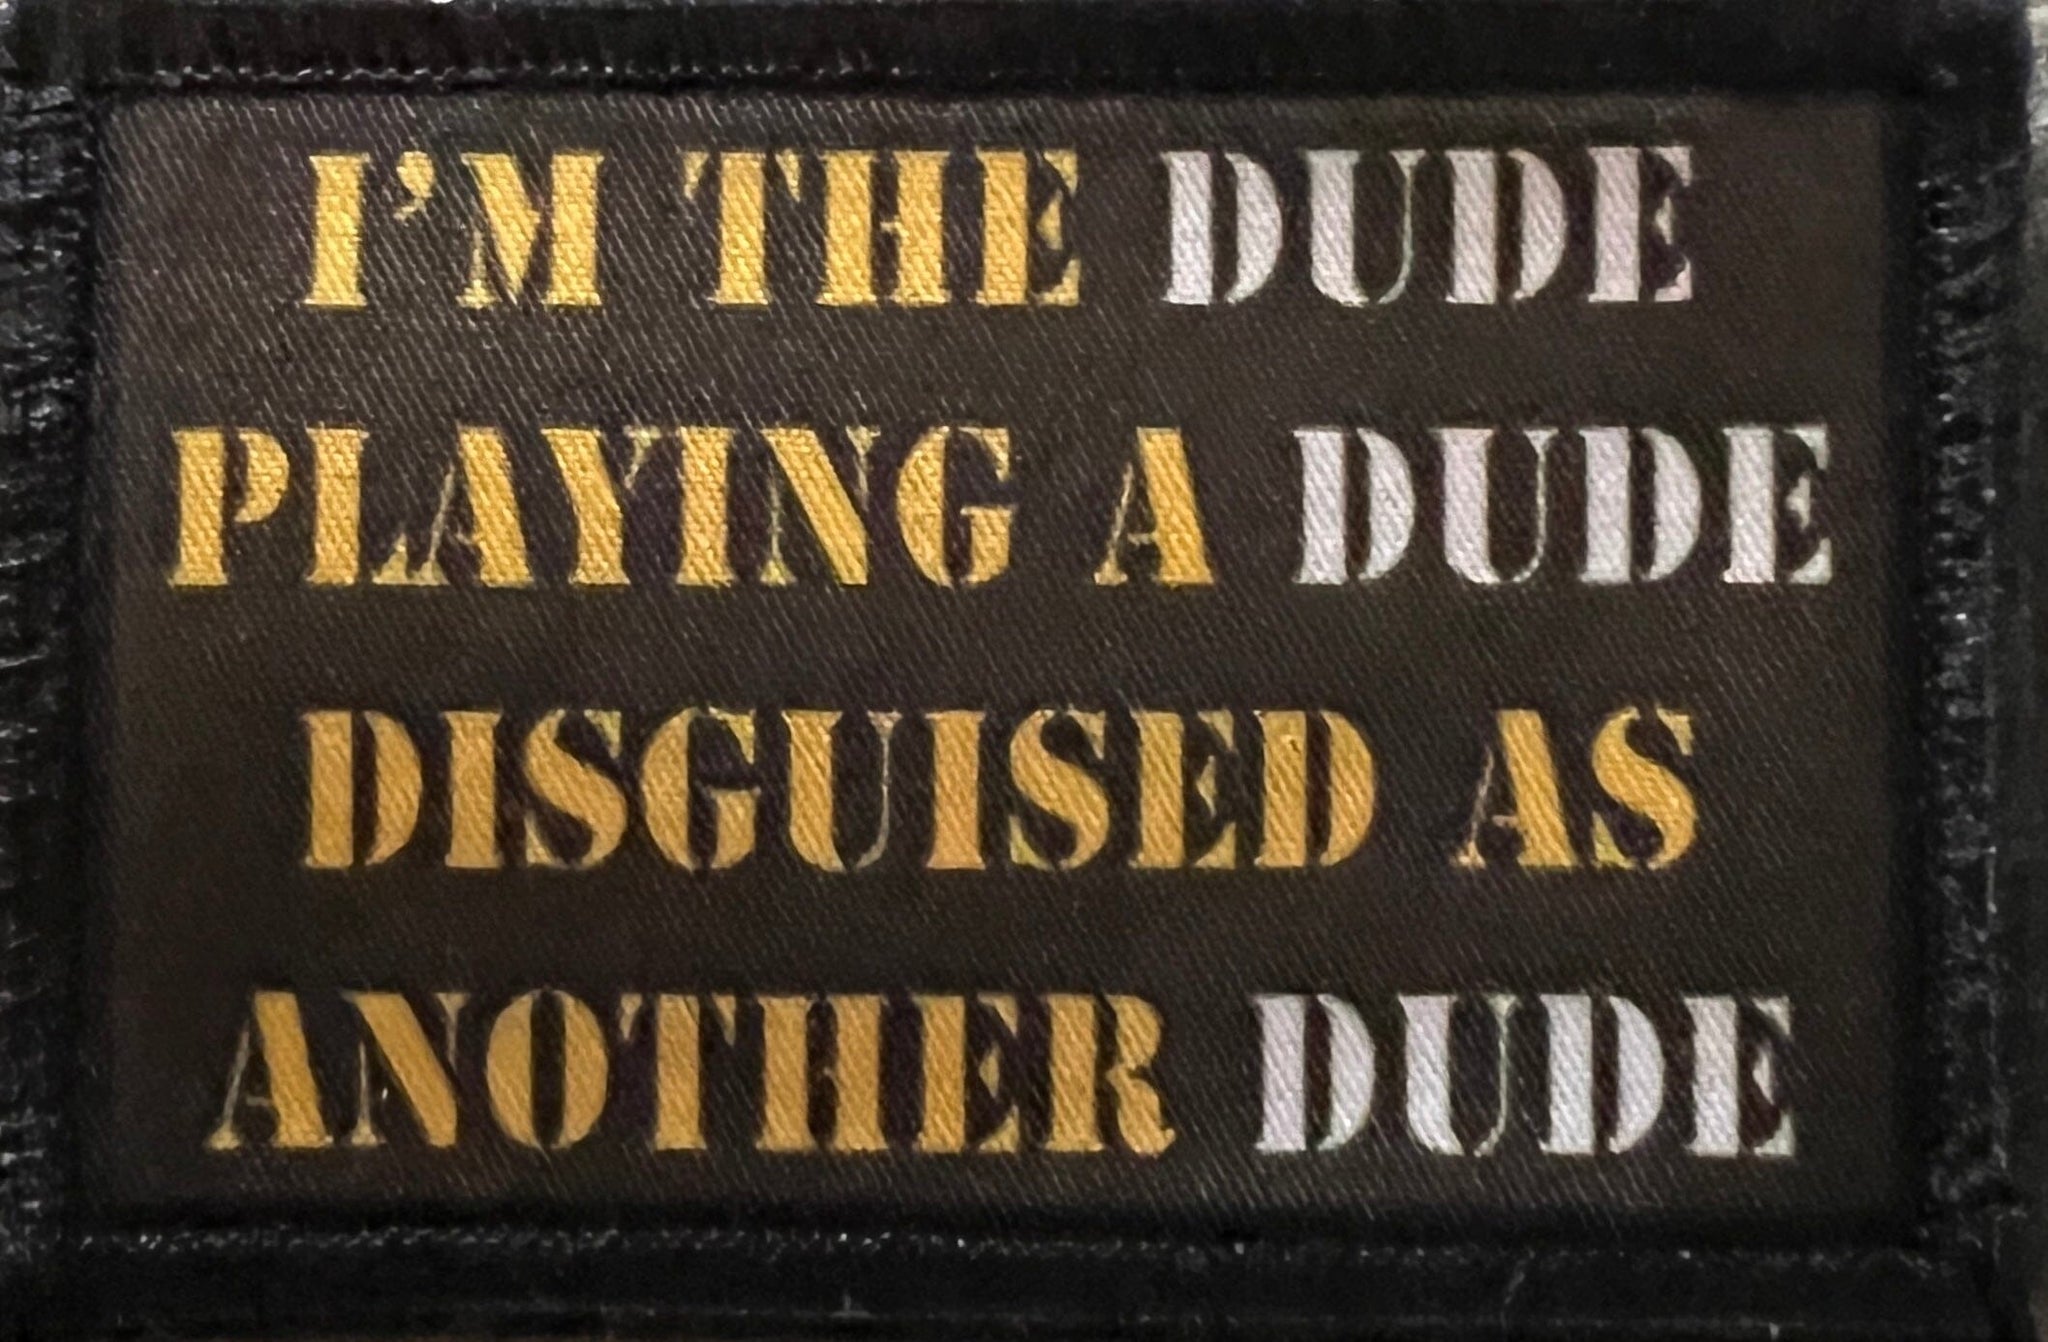 I'm The Dude Playing a Dude Tropic Thunder Morale Patch